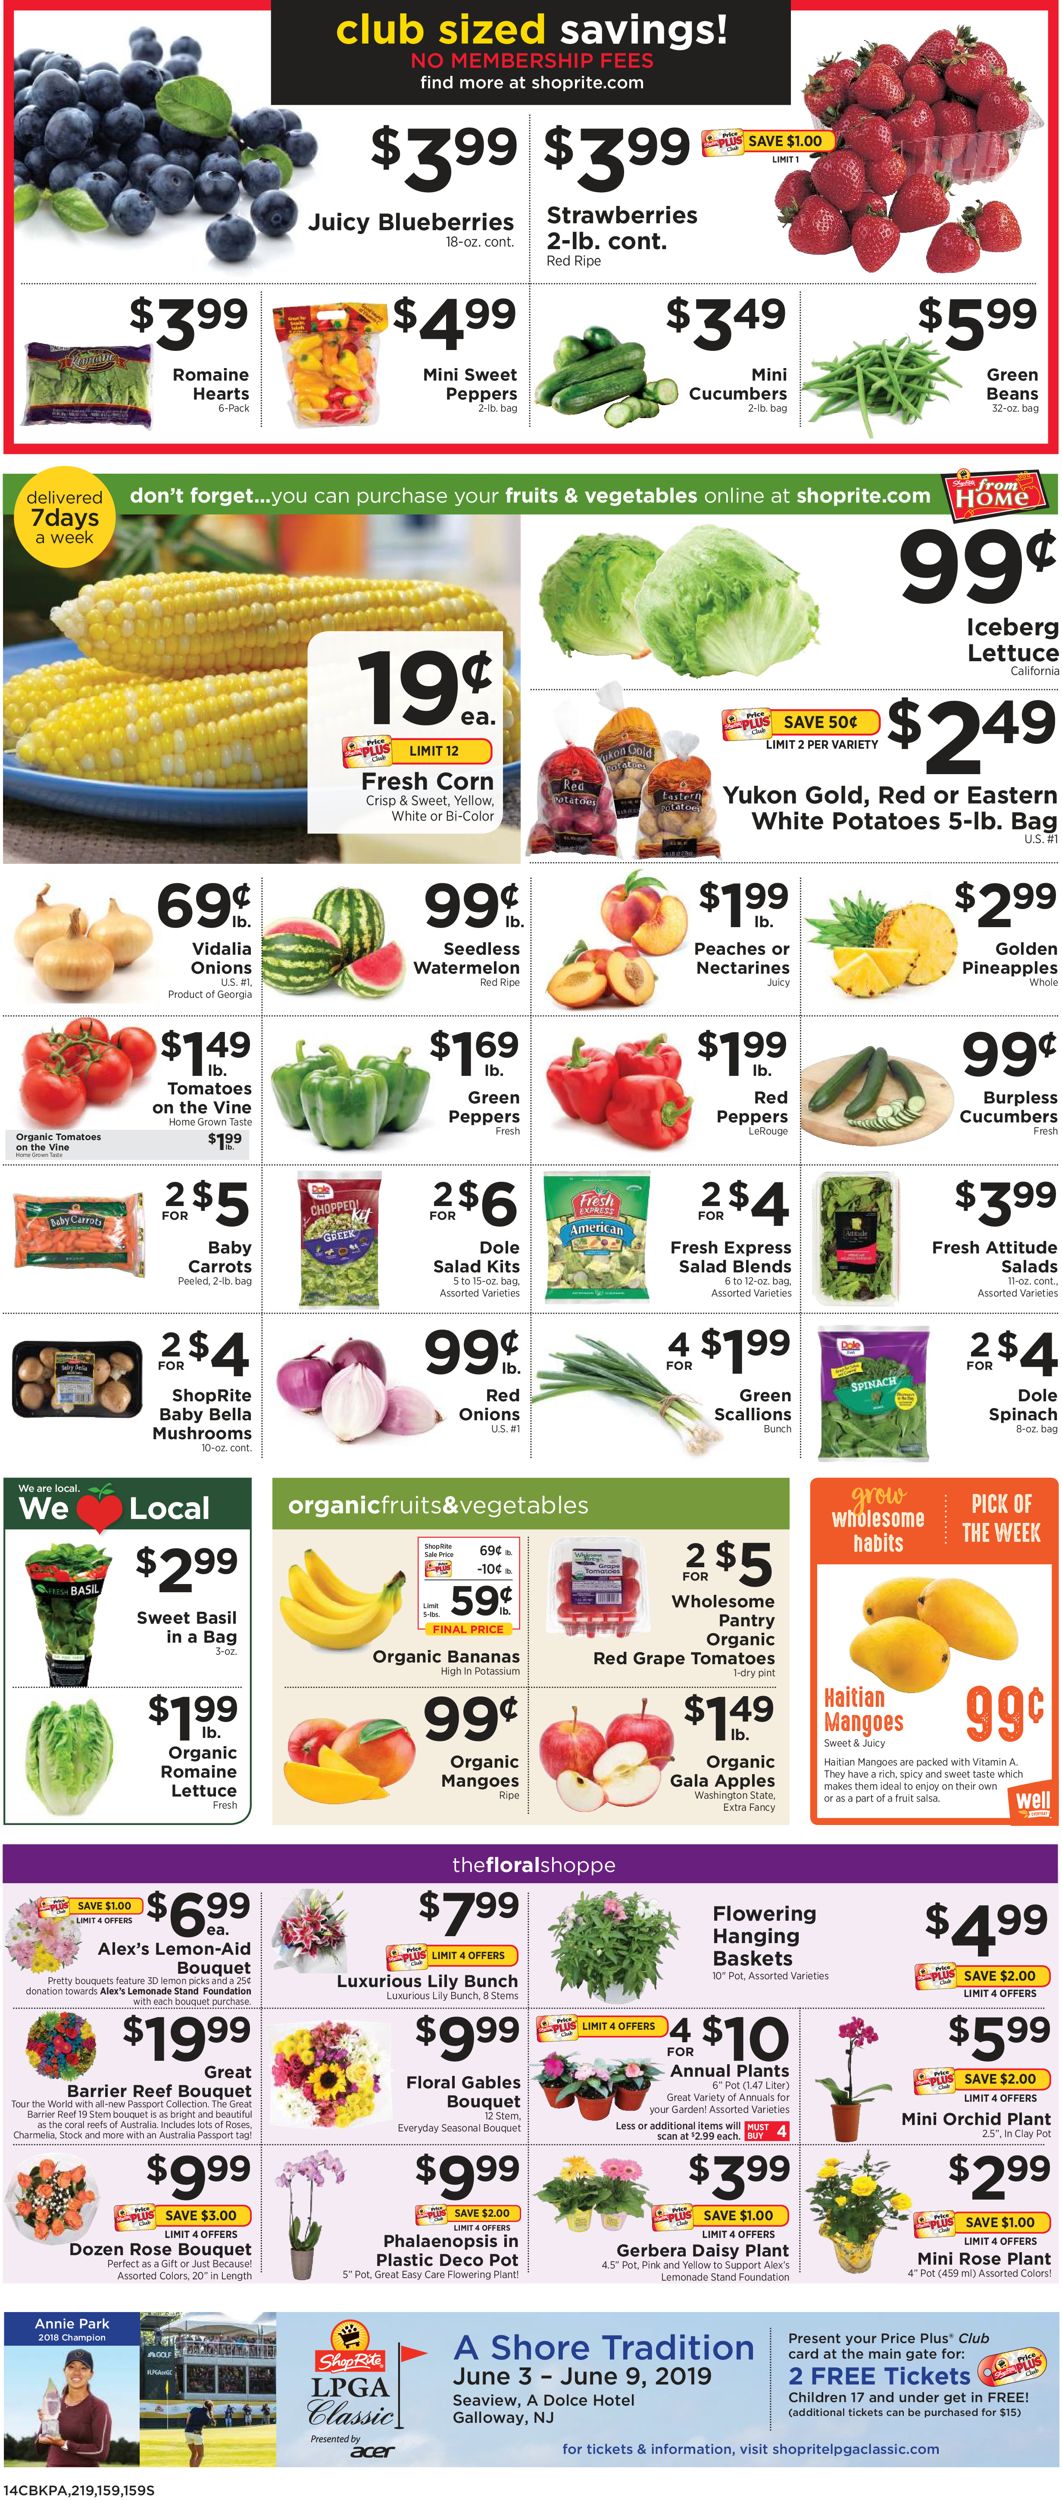 ShopRite Current weekly ad 06/02 - 06/08/2019 [14] - frequent-ads.com